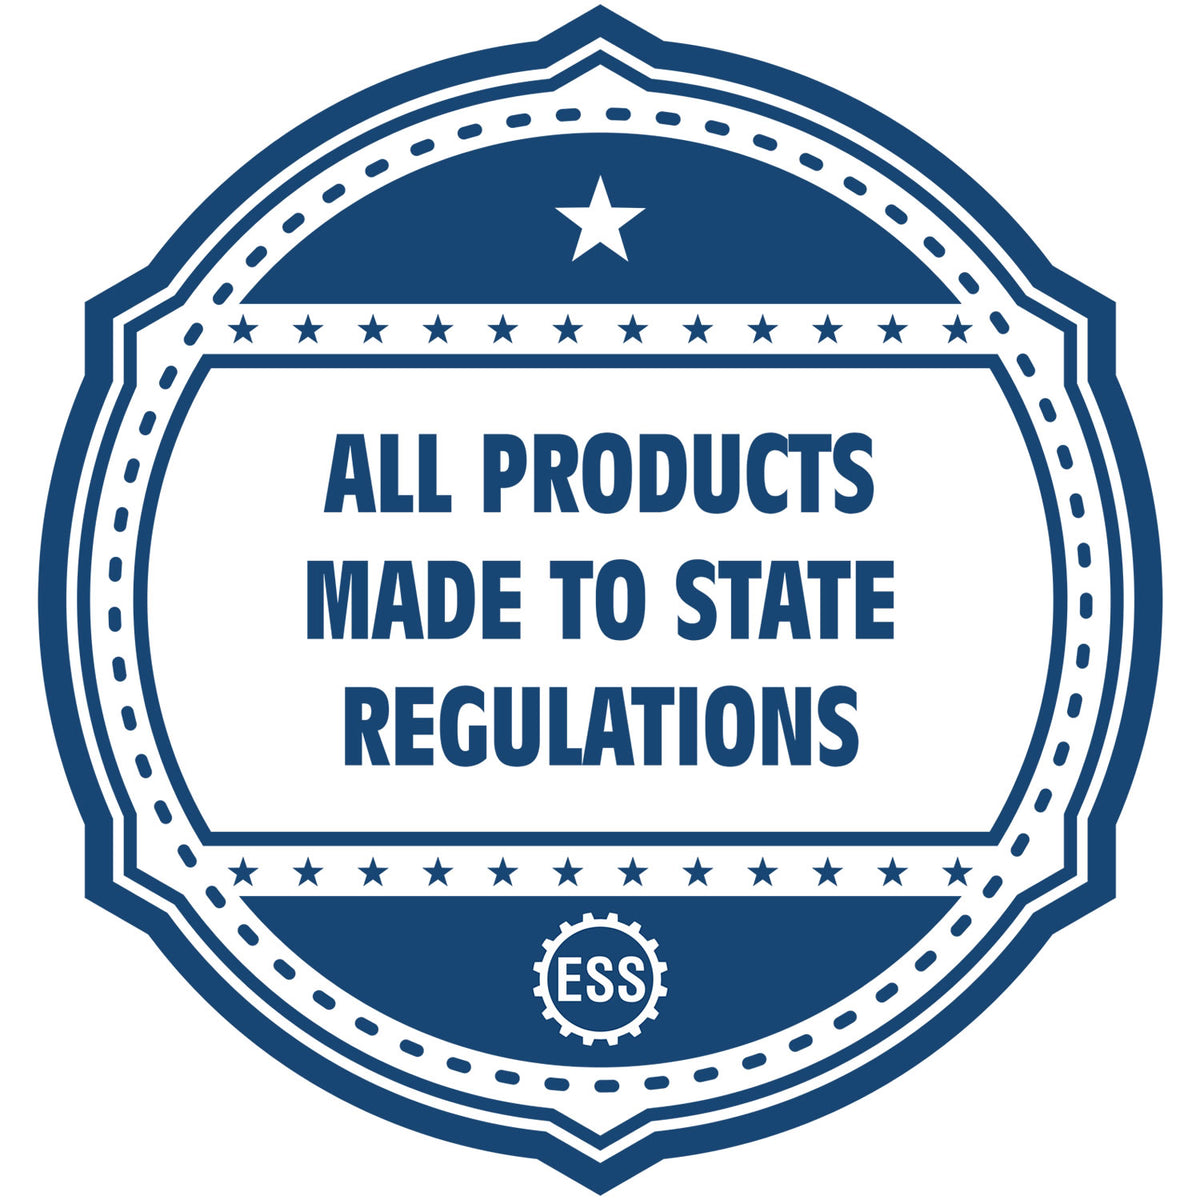 An icon or badge element for the Super Slim South Dakota Notary Public Stamp showing that this product is made in compliance with state regulations.